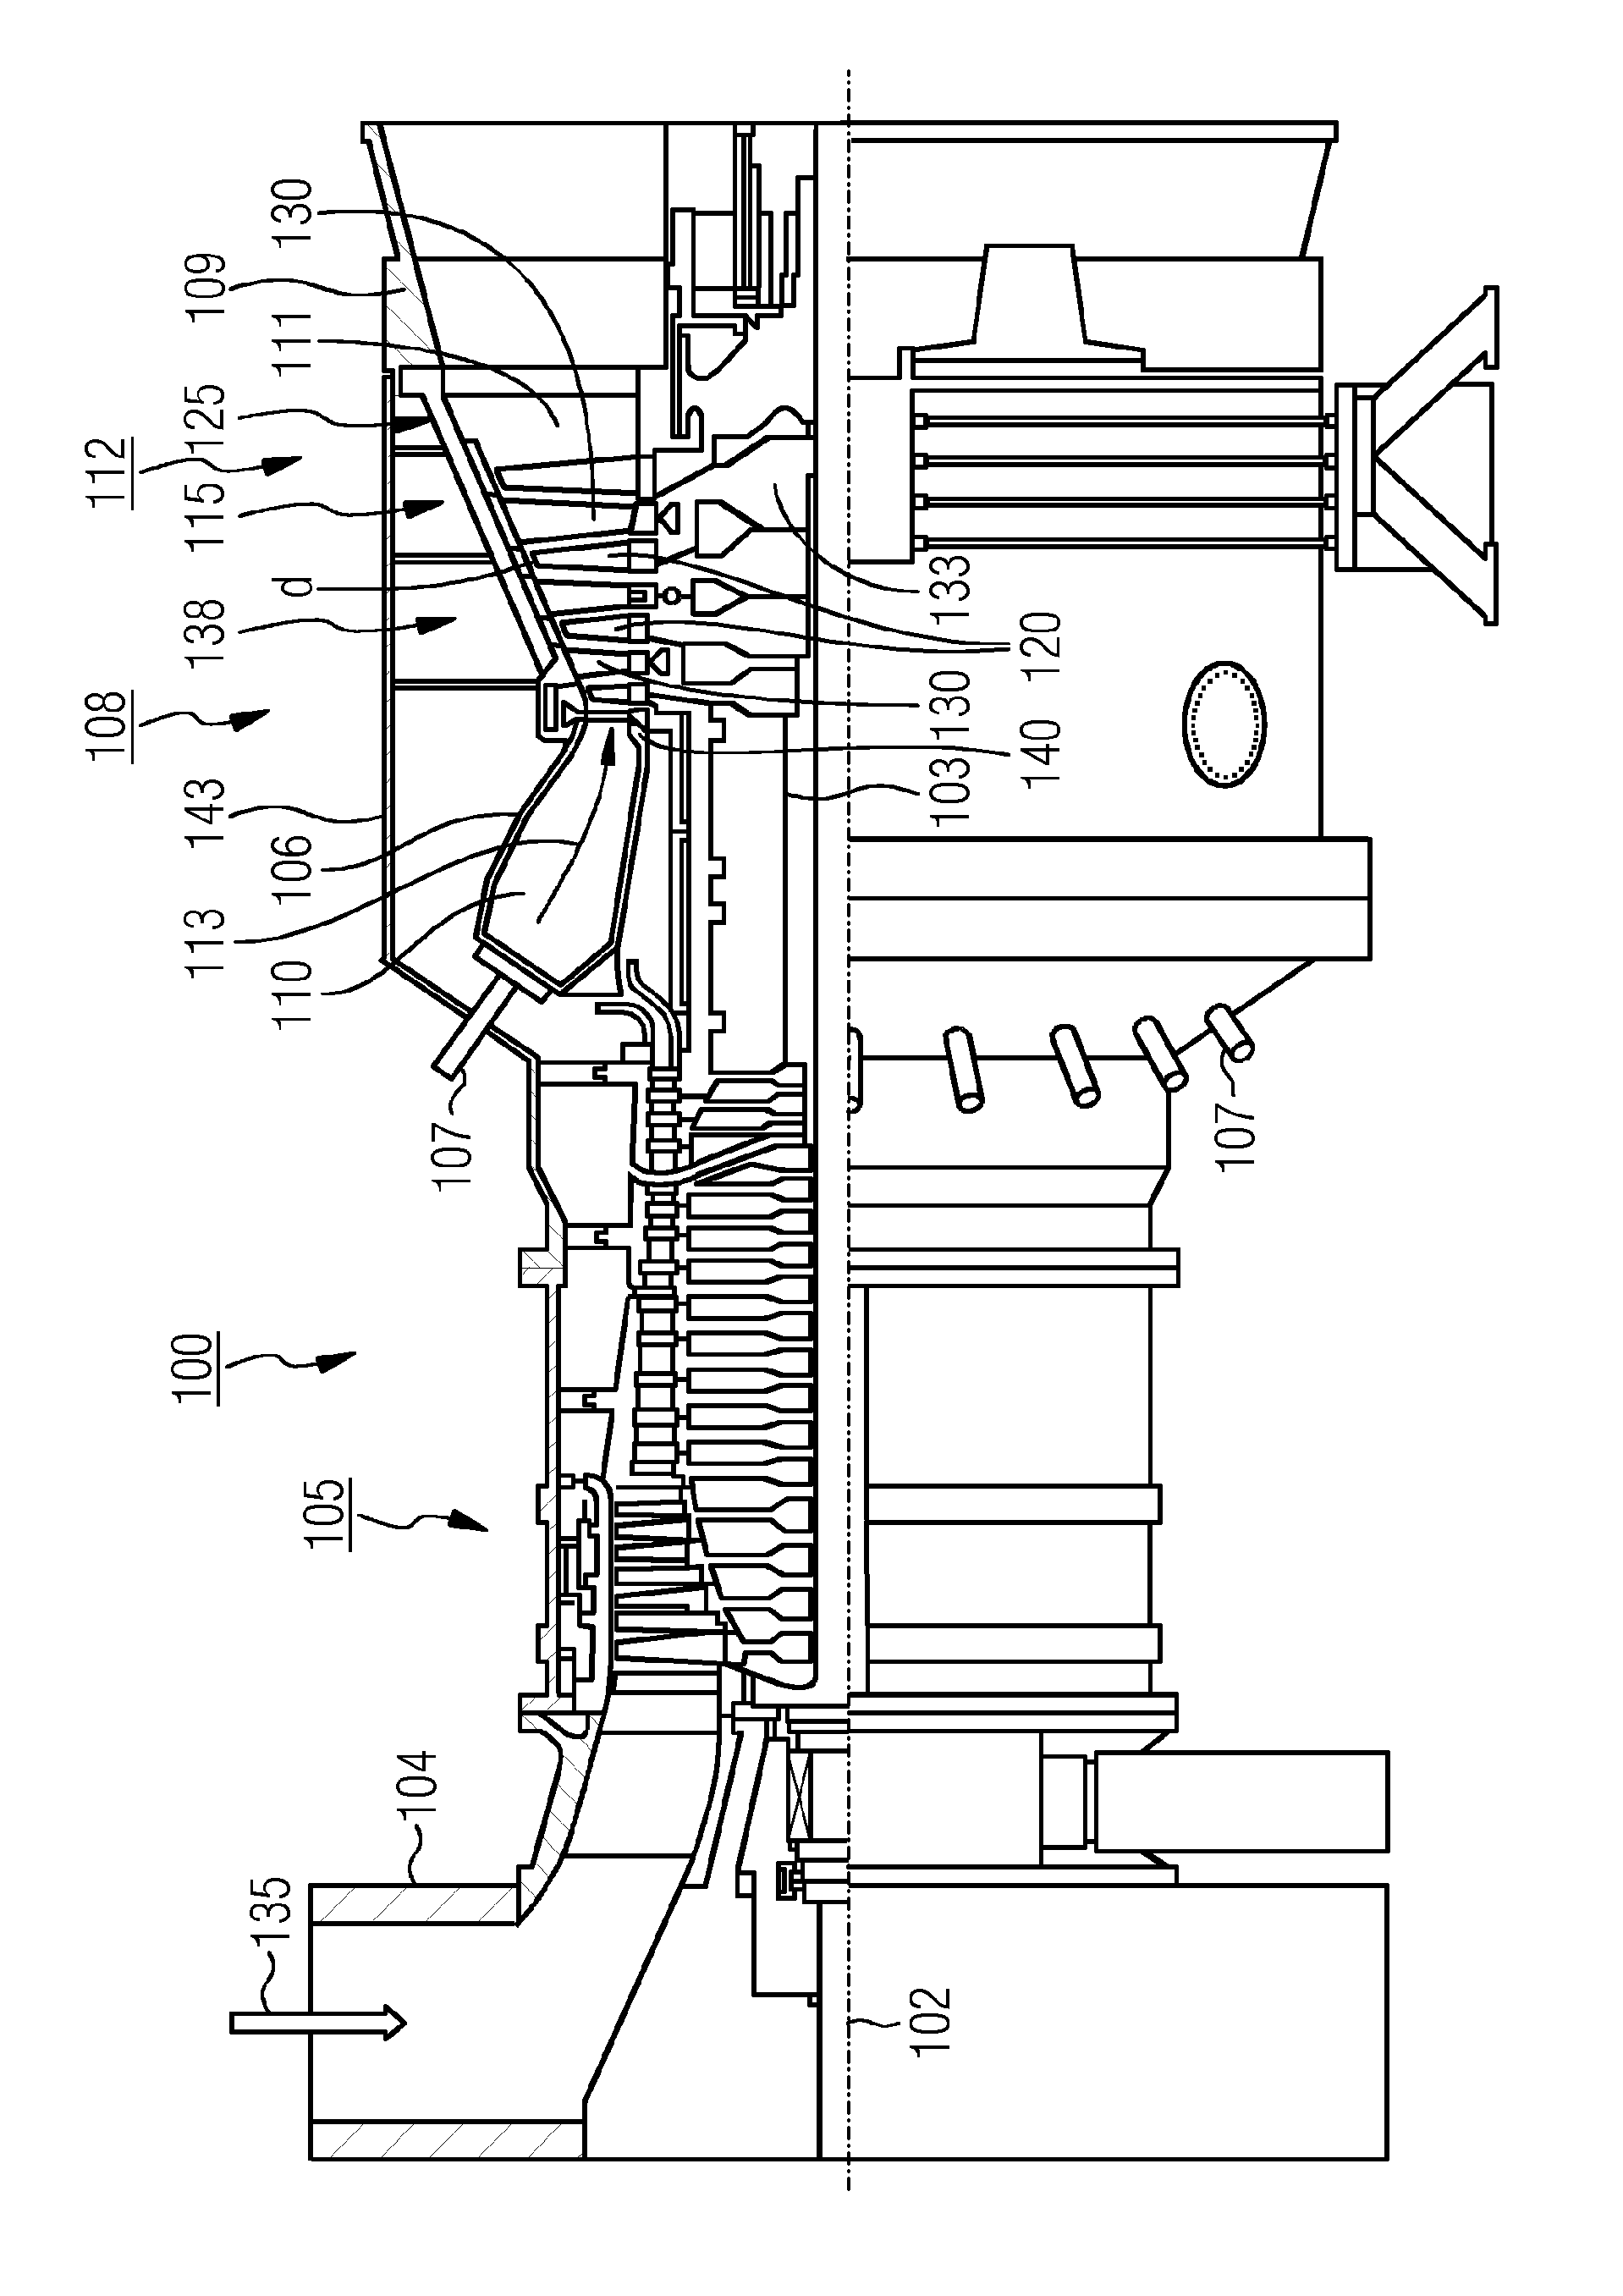 Method for minimizing the gap between a rotor and a housing